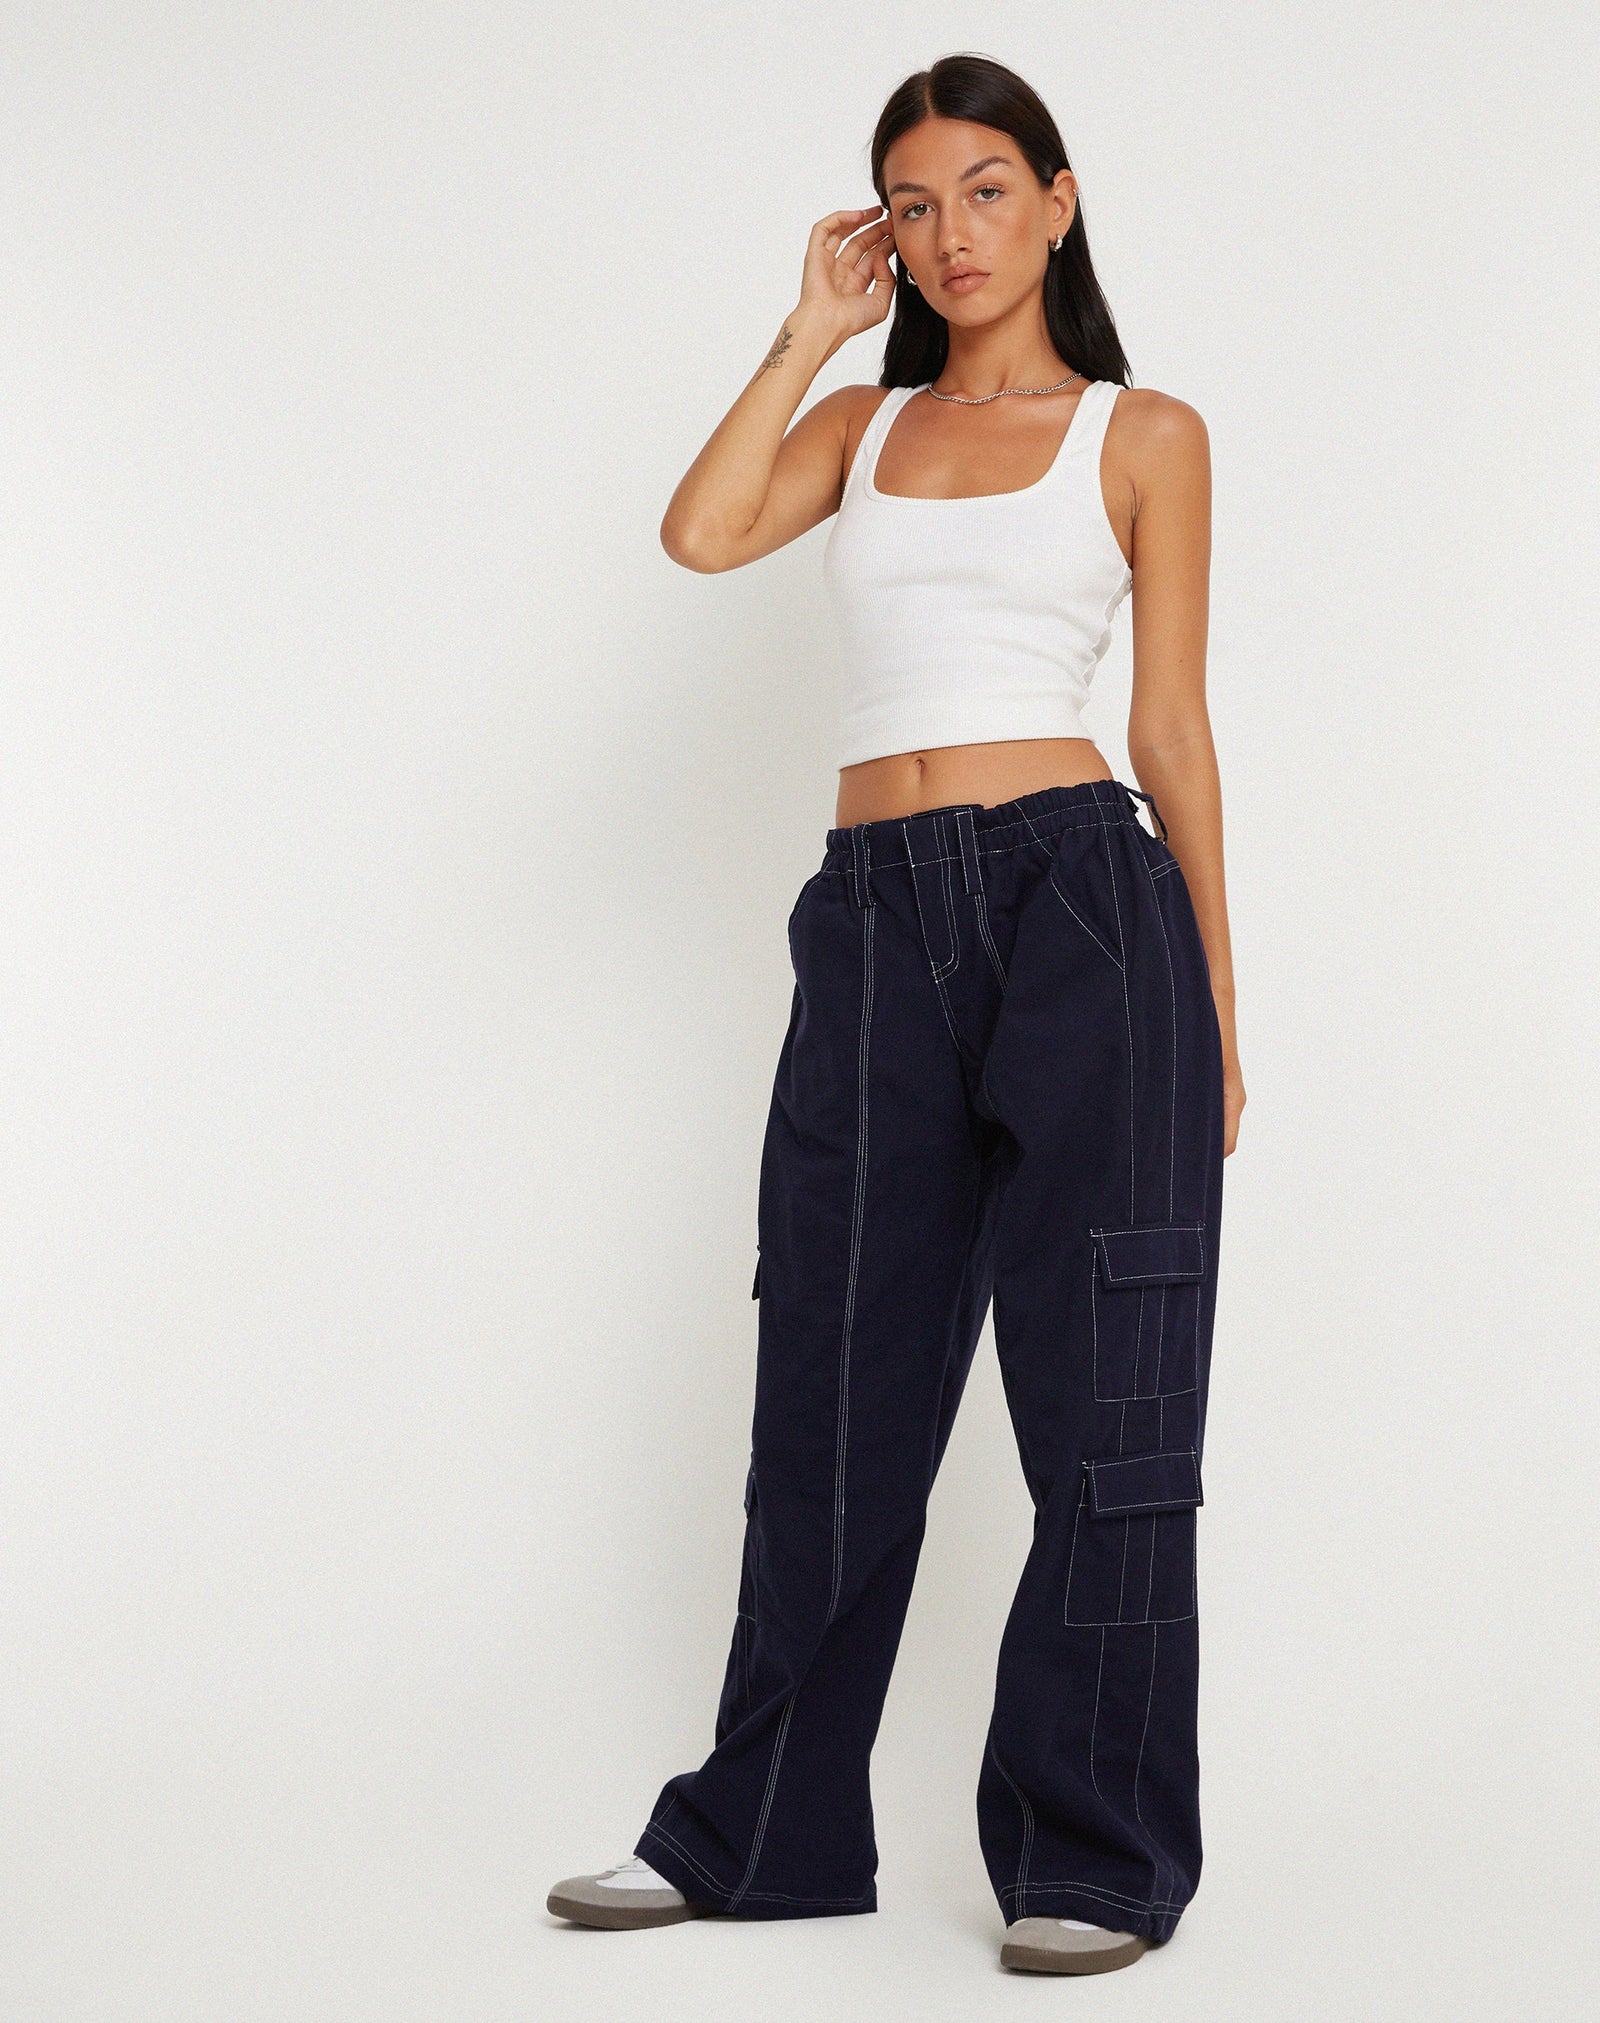 Hansa Trouser in Navy with Top White Stitch – motelrocks-com-us